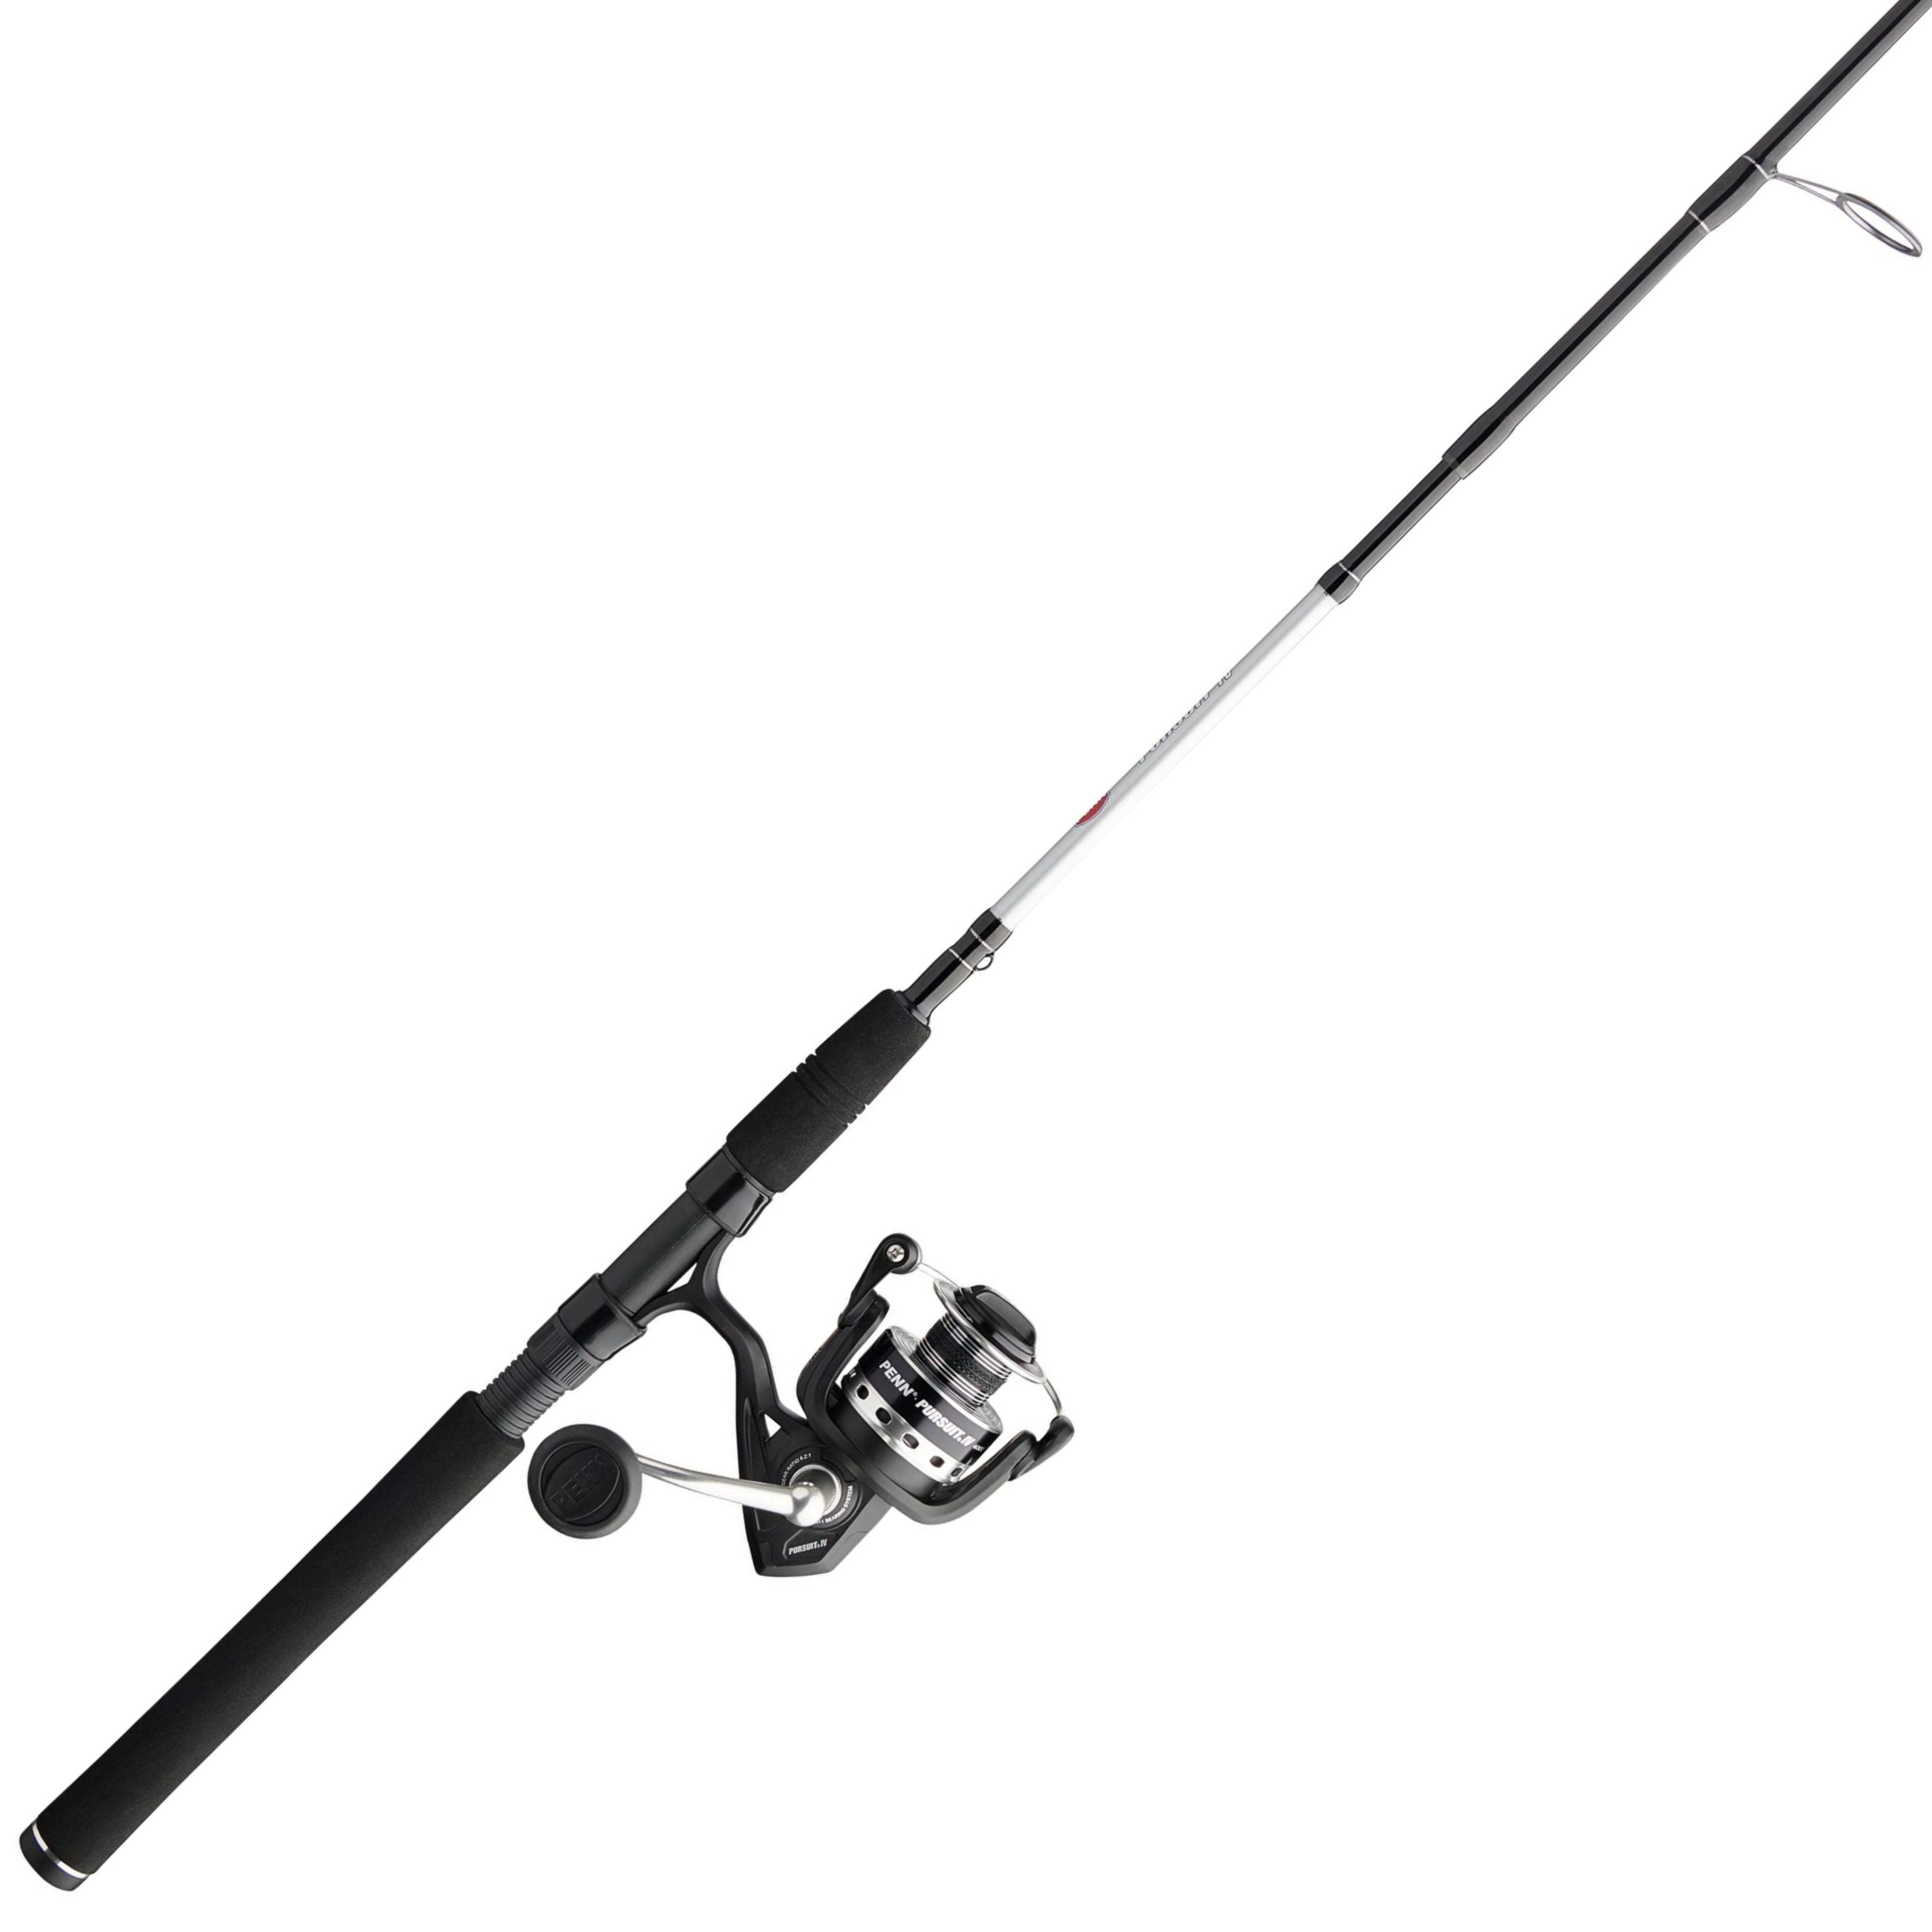 "Pursuit IV" Travel spinning combo